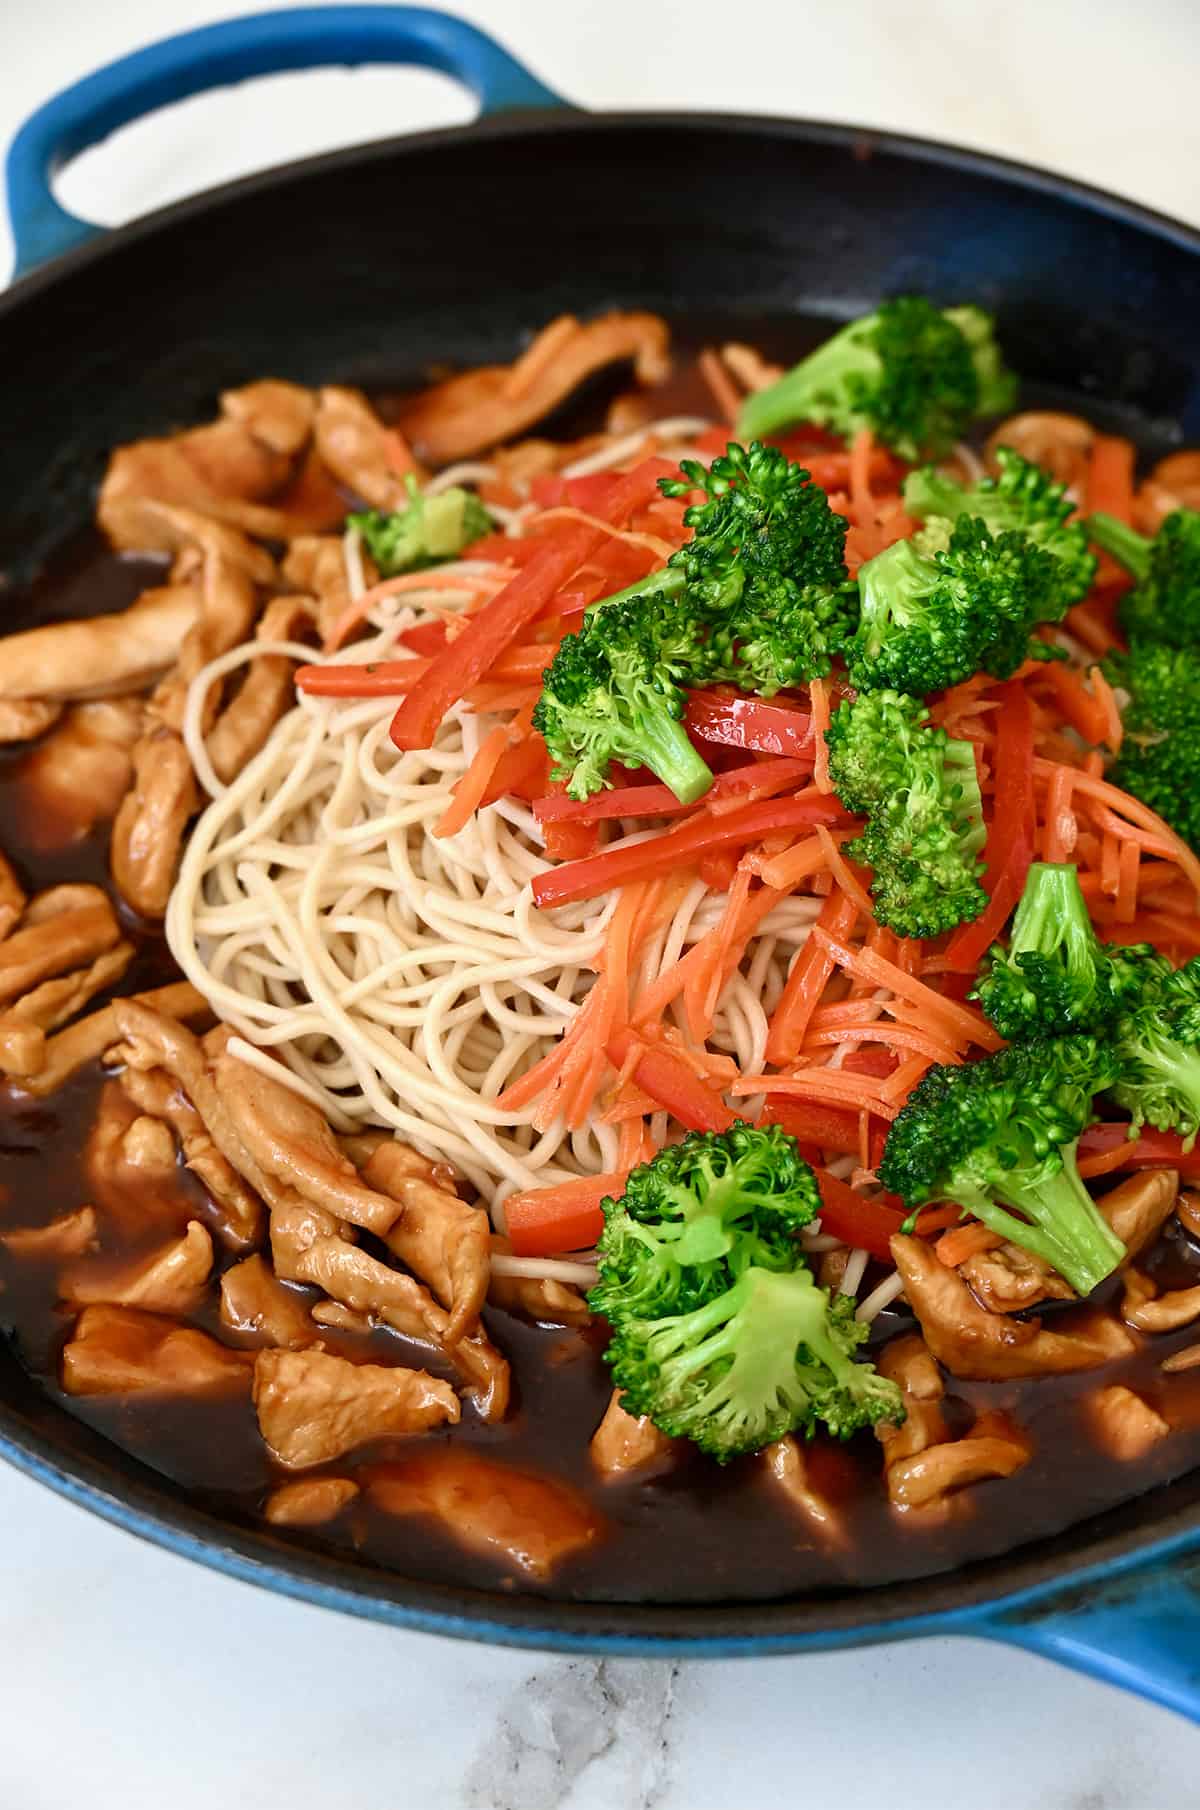 A large skillet containing teriyaki sauce, cooked chicken, noodles and stir-fried veggies.